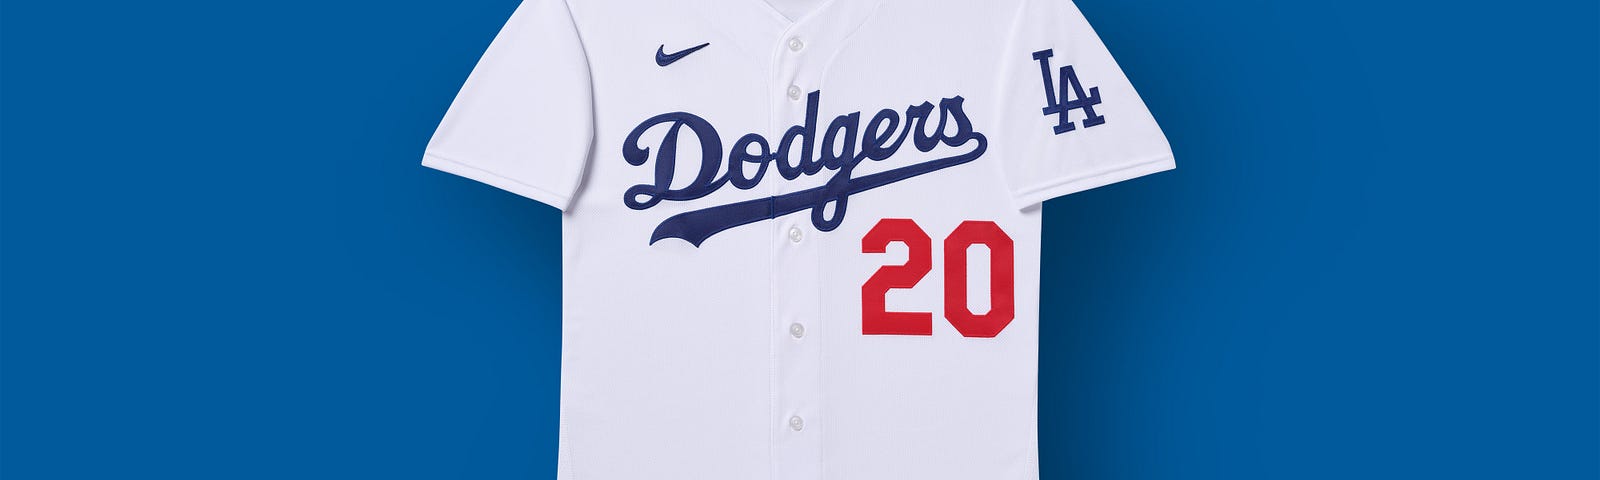 2017 MLB special event uniforms unveiled, by Rowan Kavner